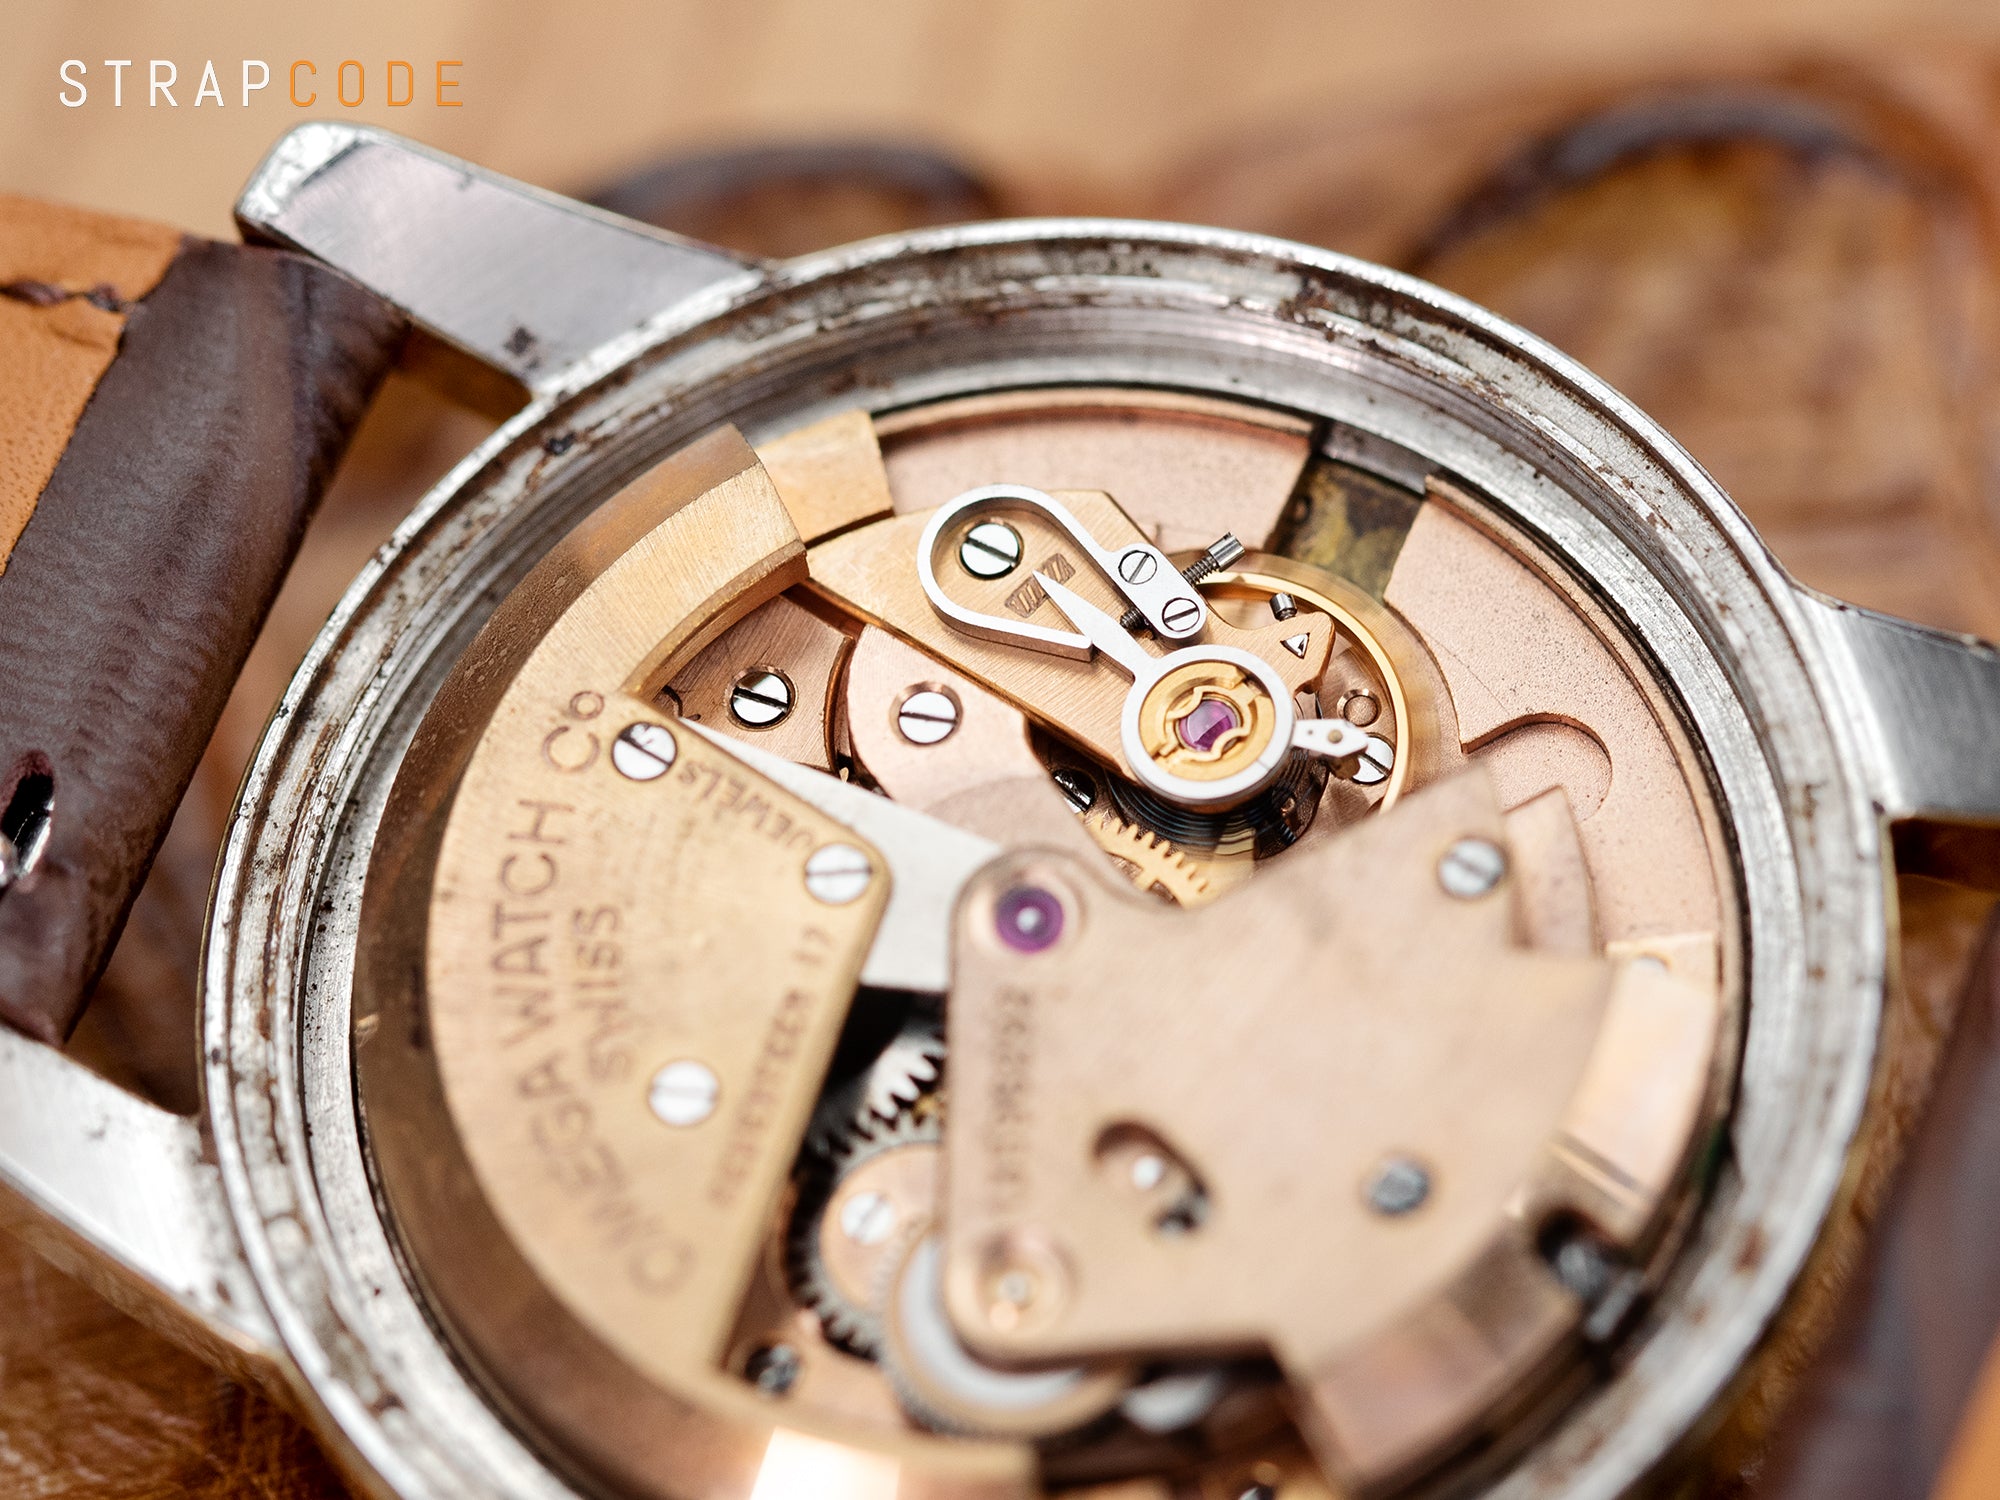 The regulator and the balance wheel, essential components of the Omega 354 bumper movement.